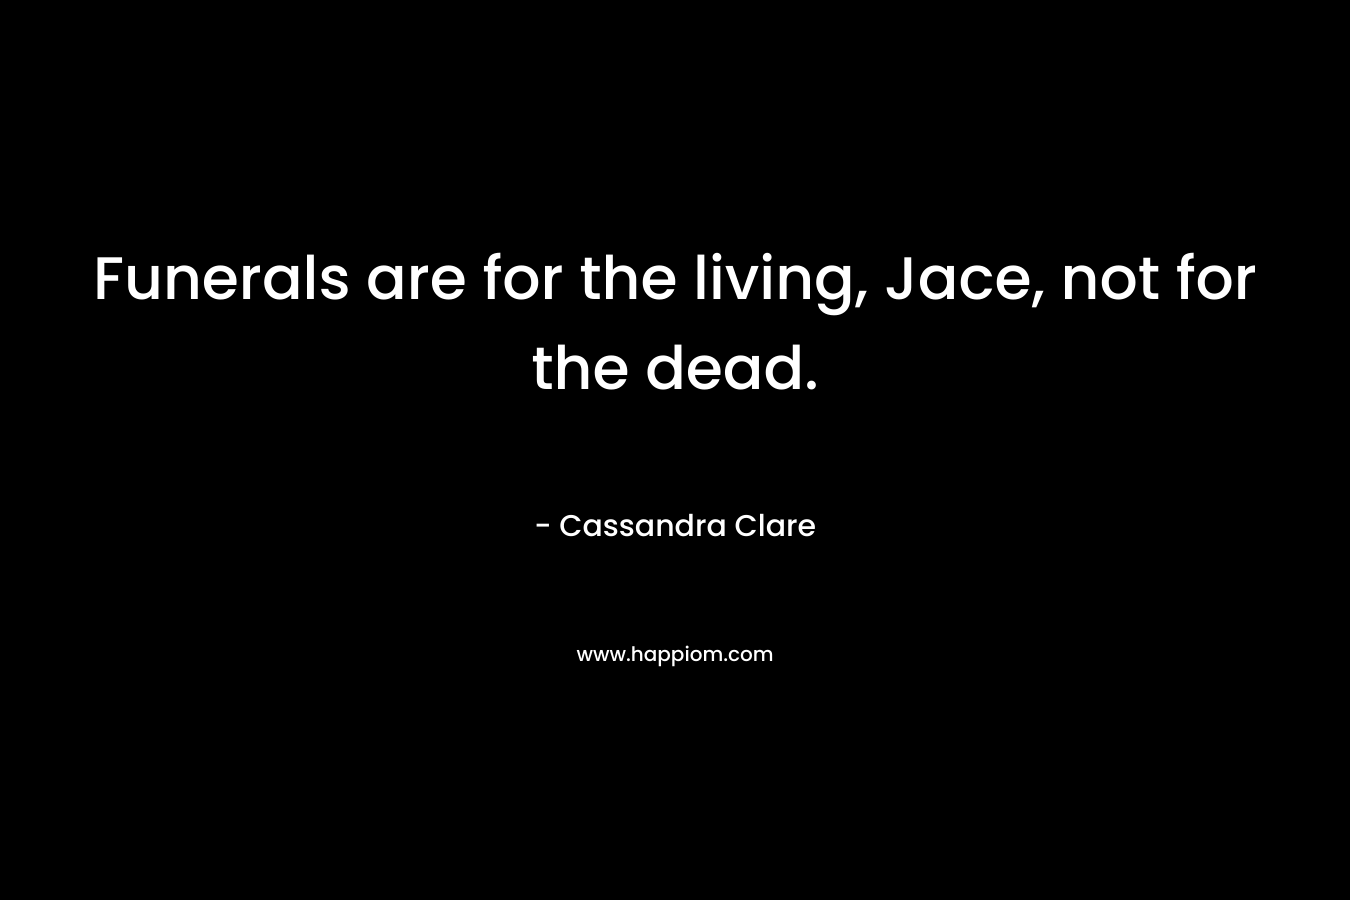 Funerals are for the living, Jace, not for the dead.